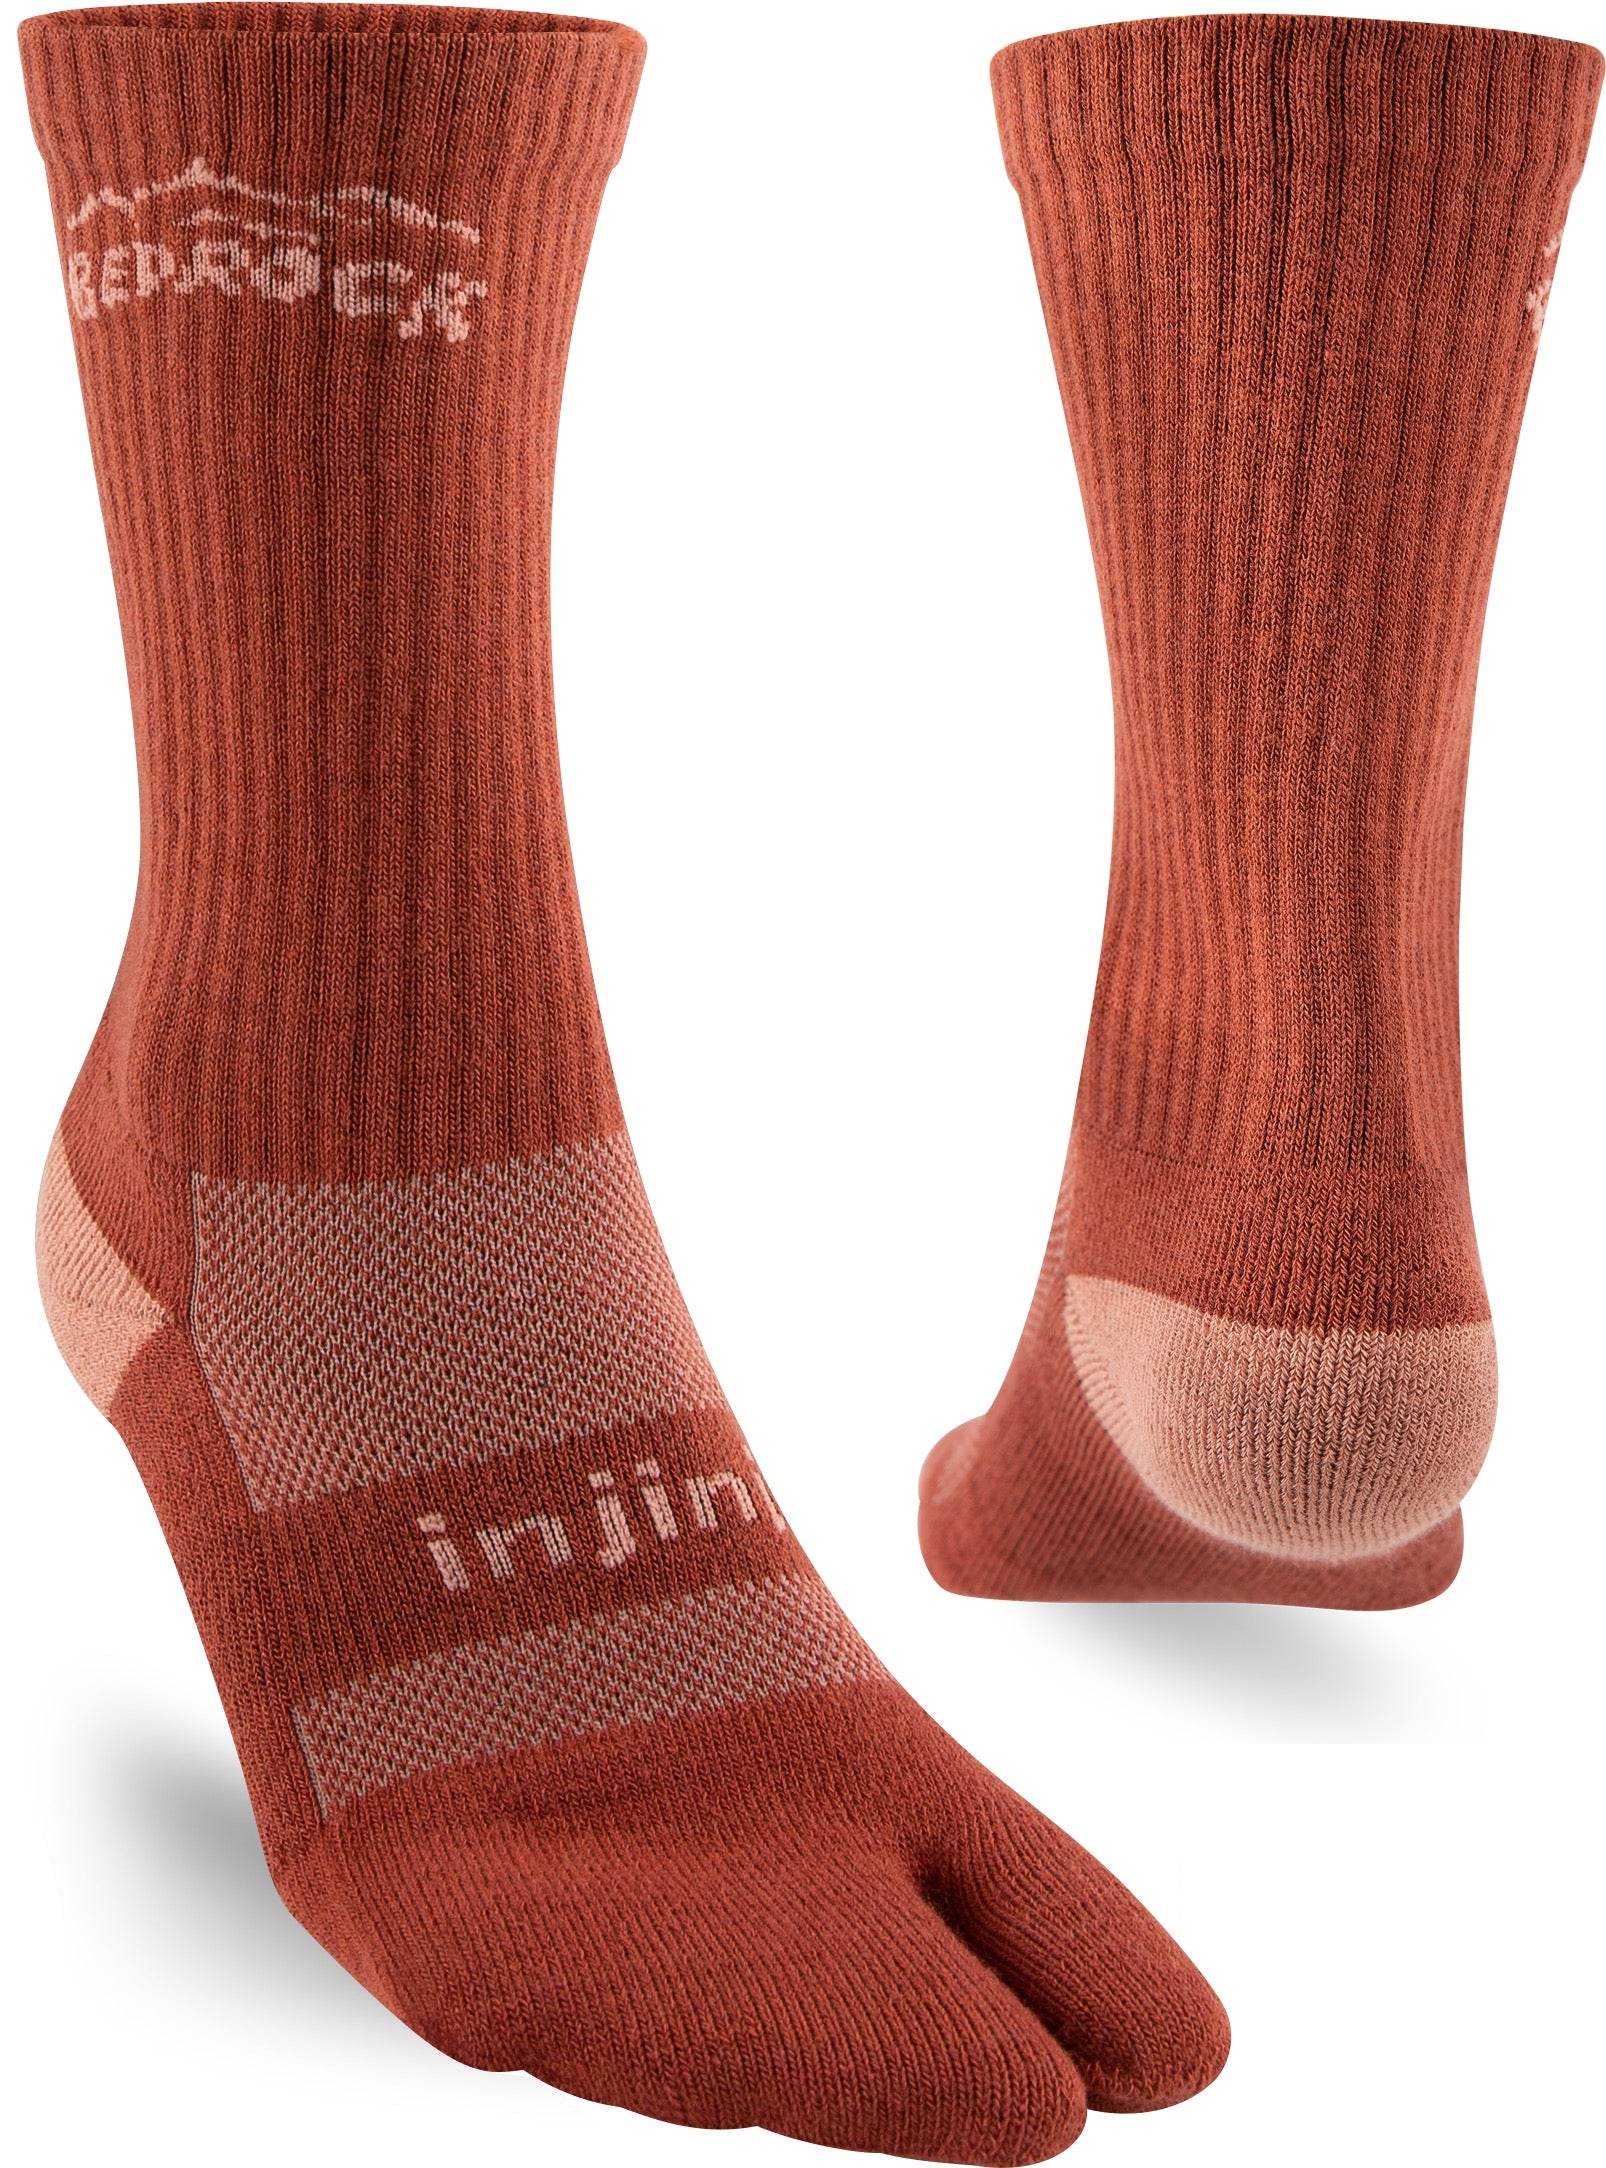 Product Review: Socks That Rock From Injinji